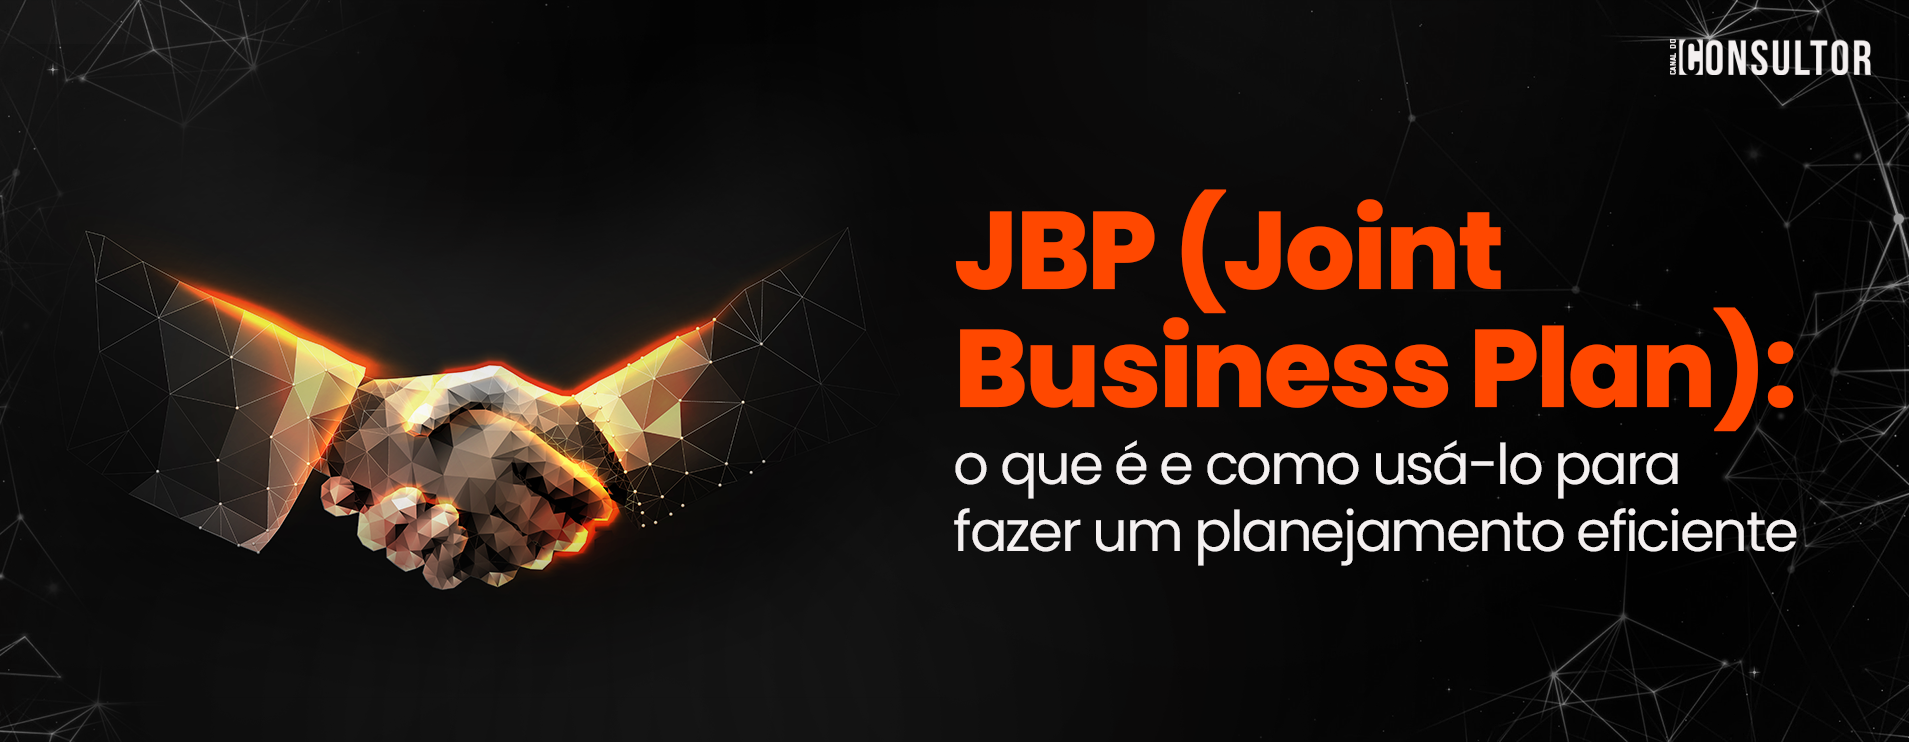 joint business plan o que significa